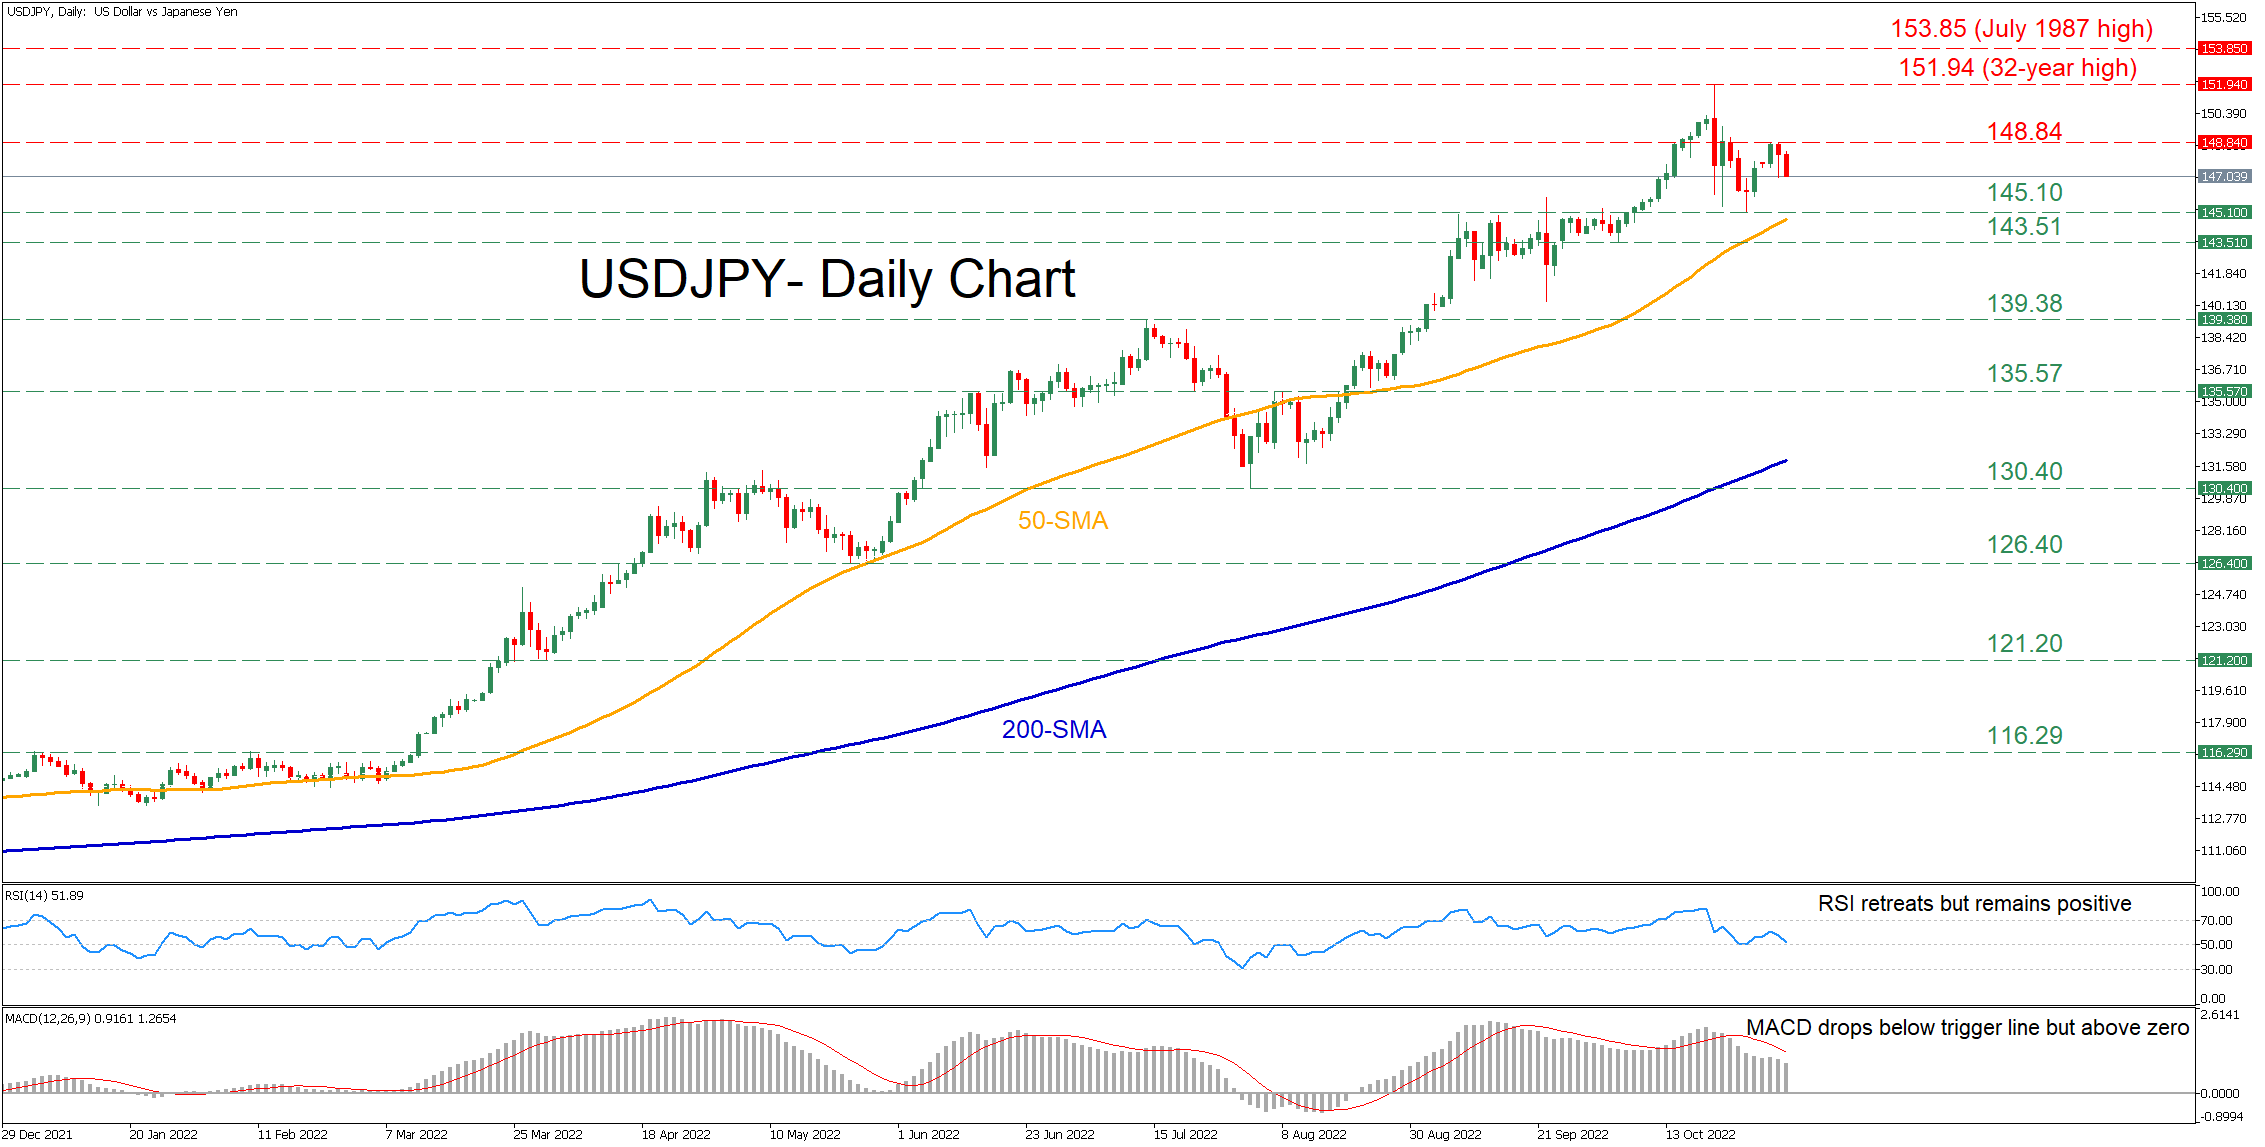 USD/JPY consolidates after advance pauses, uptrend intact